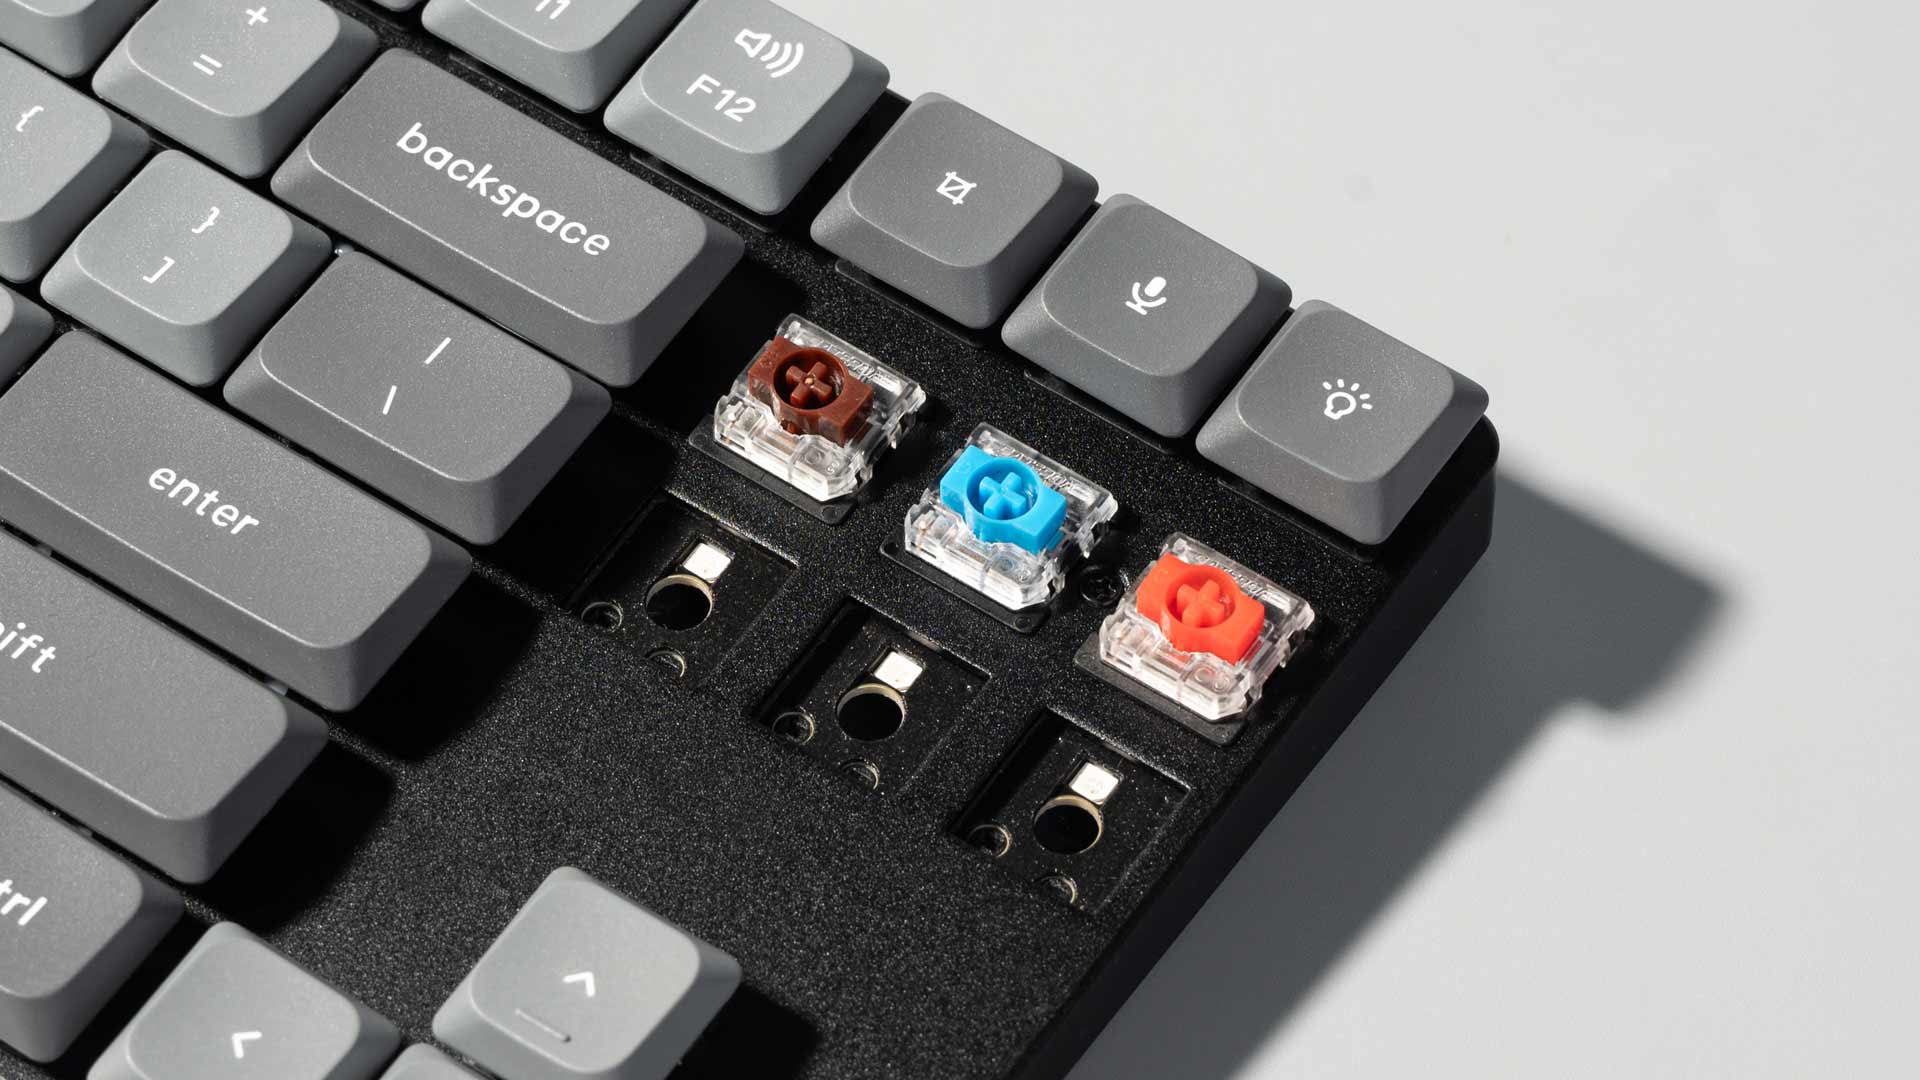 Hot-swappable feature of the Keychron K1 Max Wireless Mechanical Keyboard